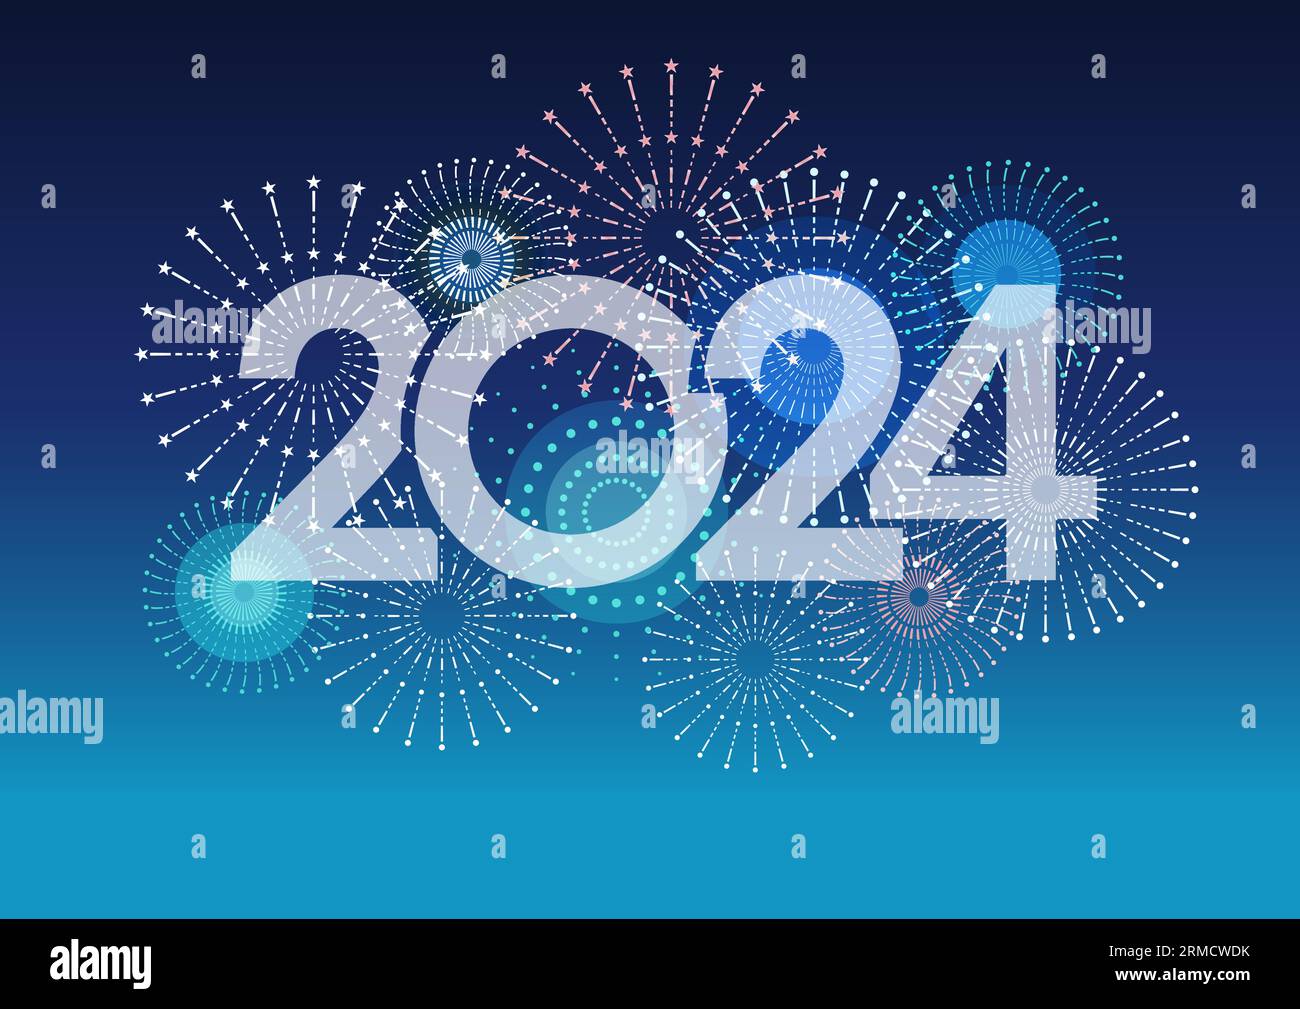 The Year 2024 Logo And Fireworks With Text Space On A Blue Background. Vector illustration Celebrating The New Year. Stock Vector